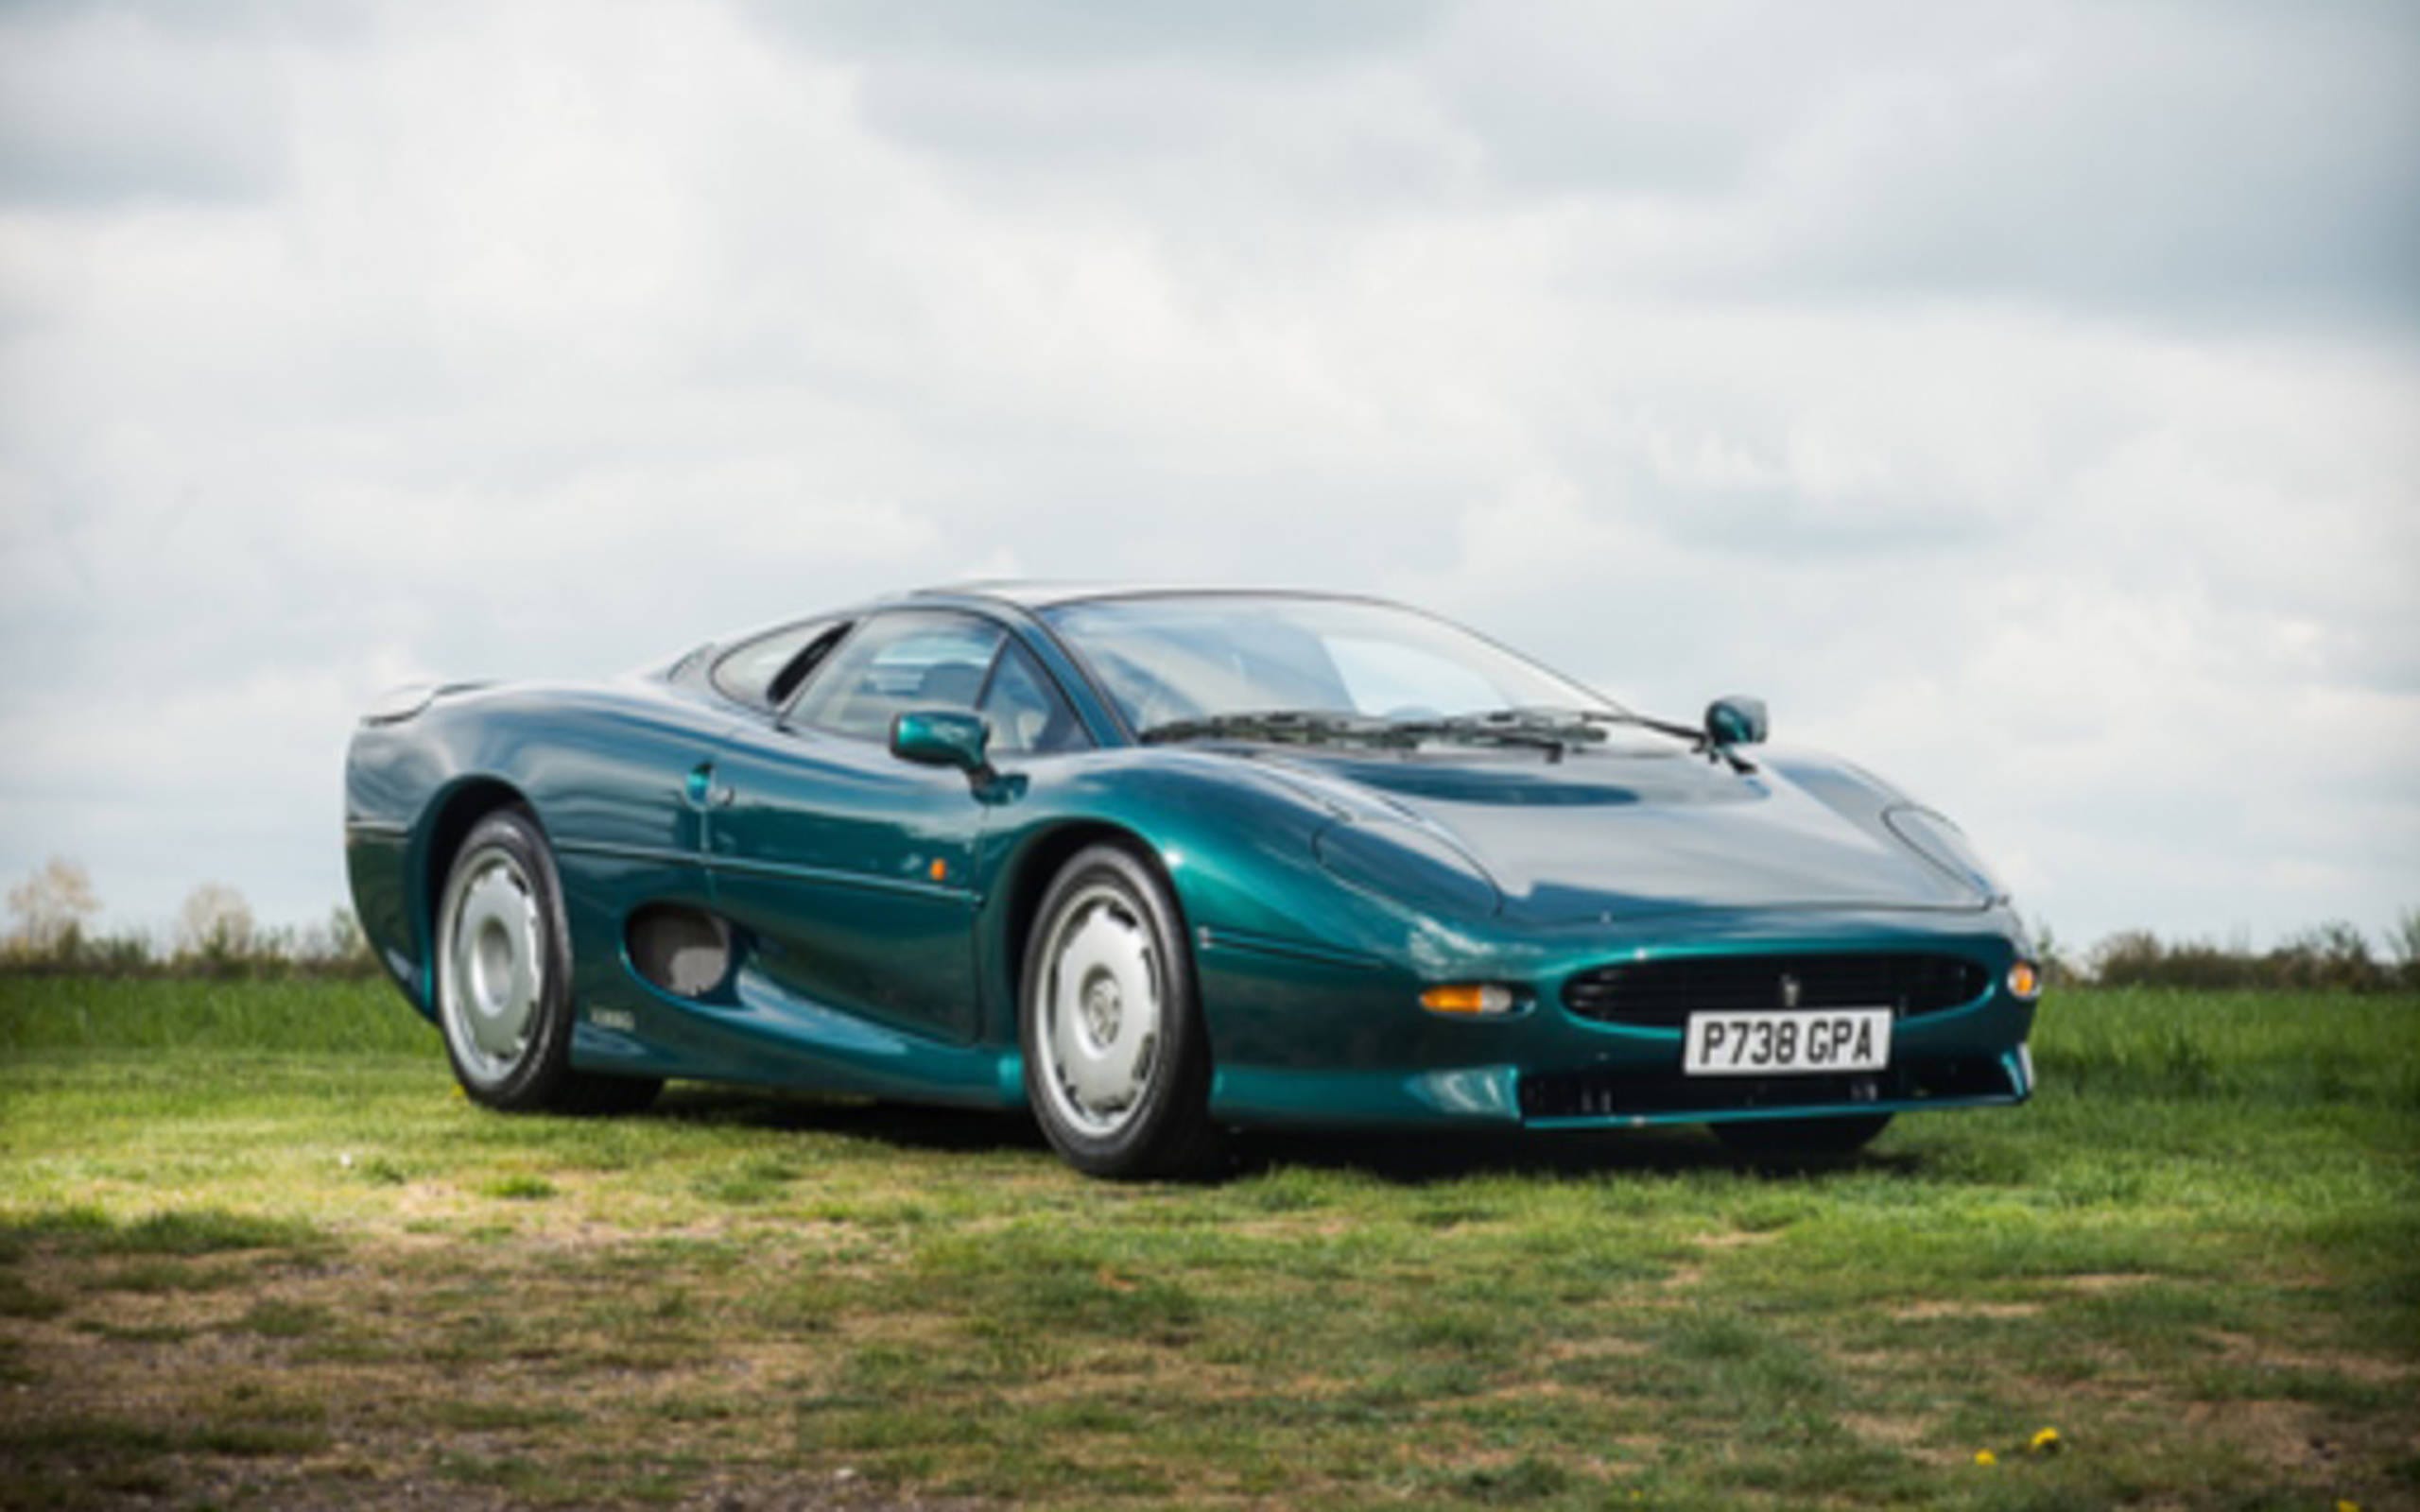 Gallery 1994 Jaguar XJ220 at Silverstone Auctions